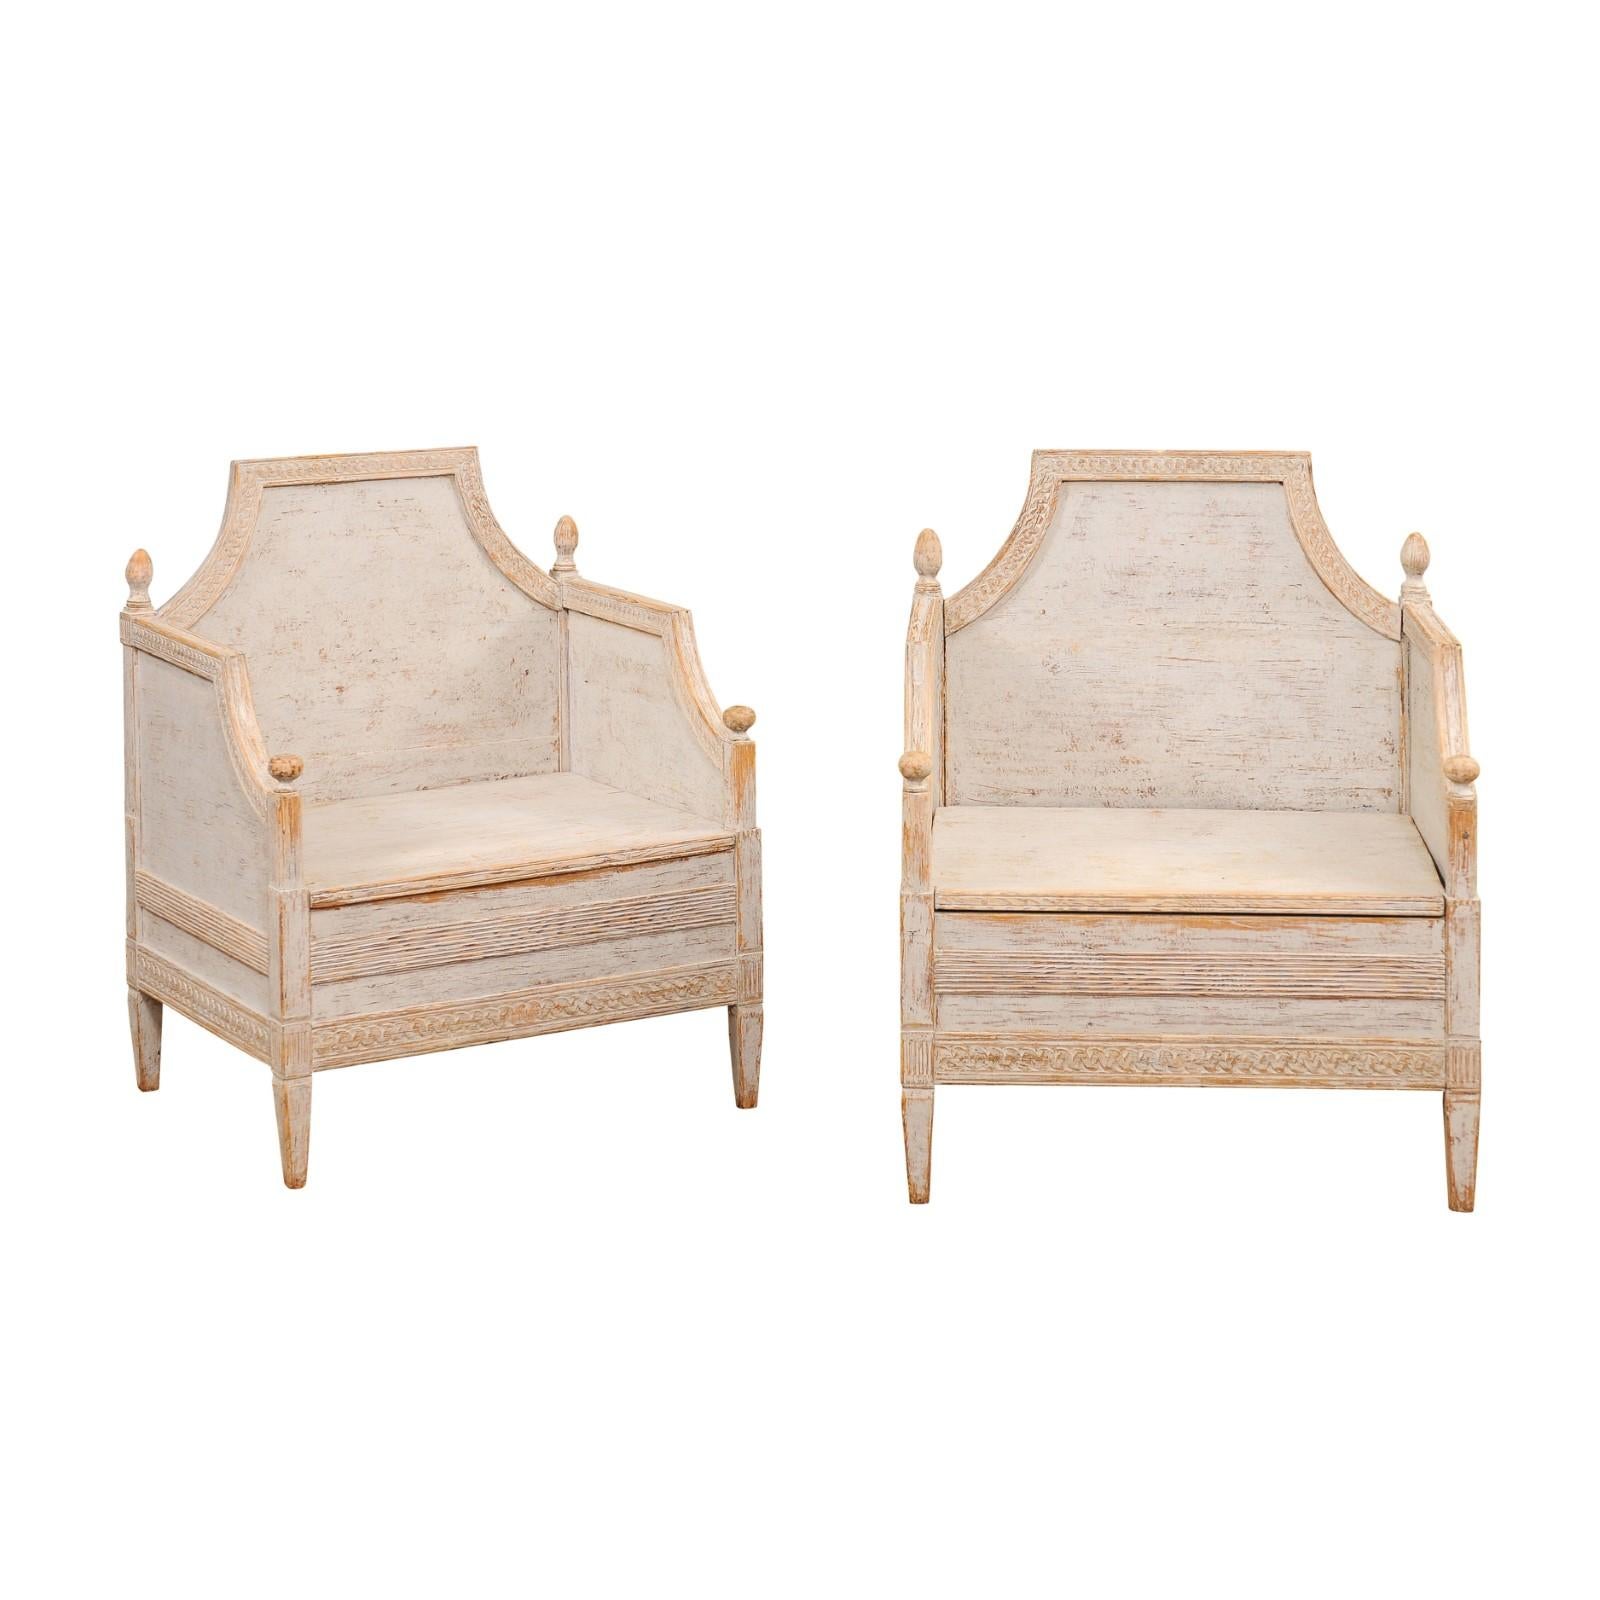 A pair of Swedish Neoclassical style wooden armchairs from circa 1850 with carved guilloche friezes, Classic light gray painted finish and carved finials. These exquisite Swedish Neoclassical style wooden armchairs, dating back to approximately